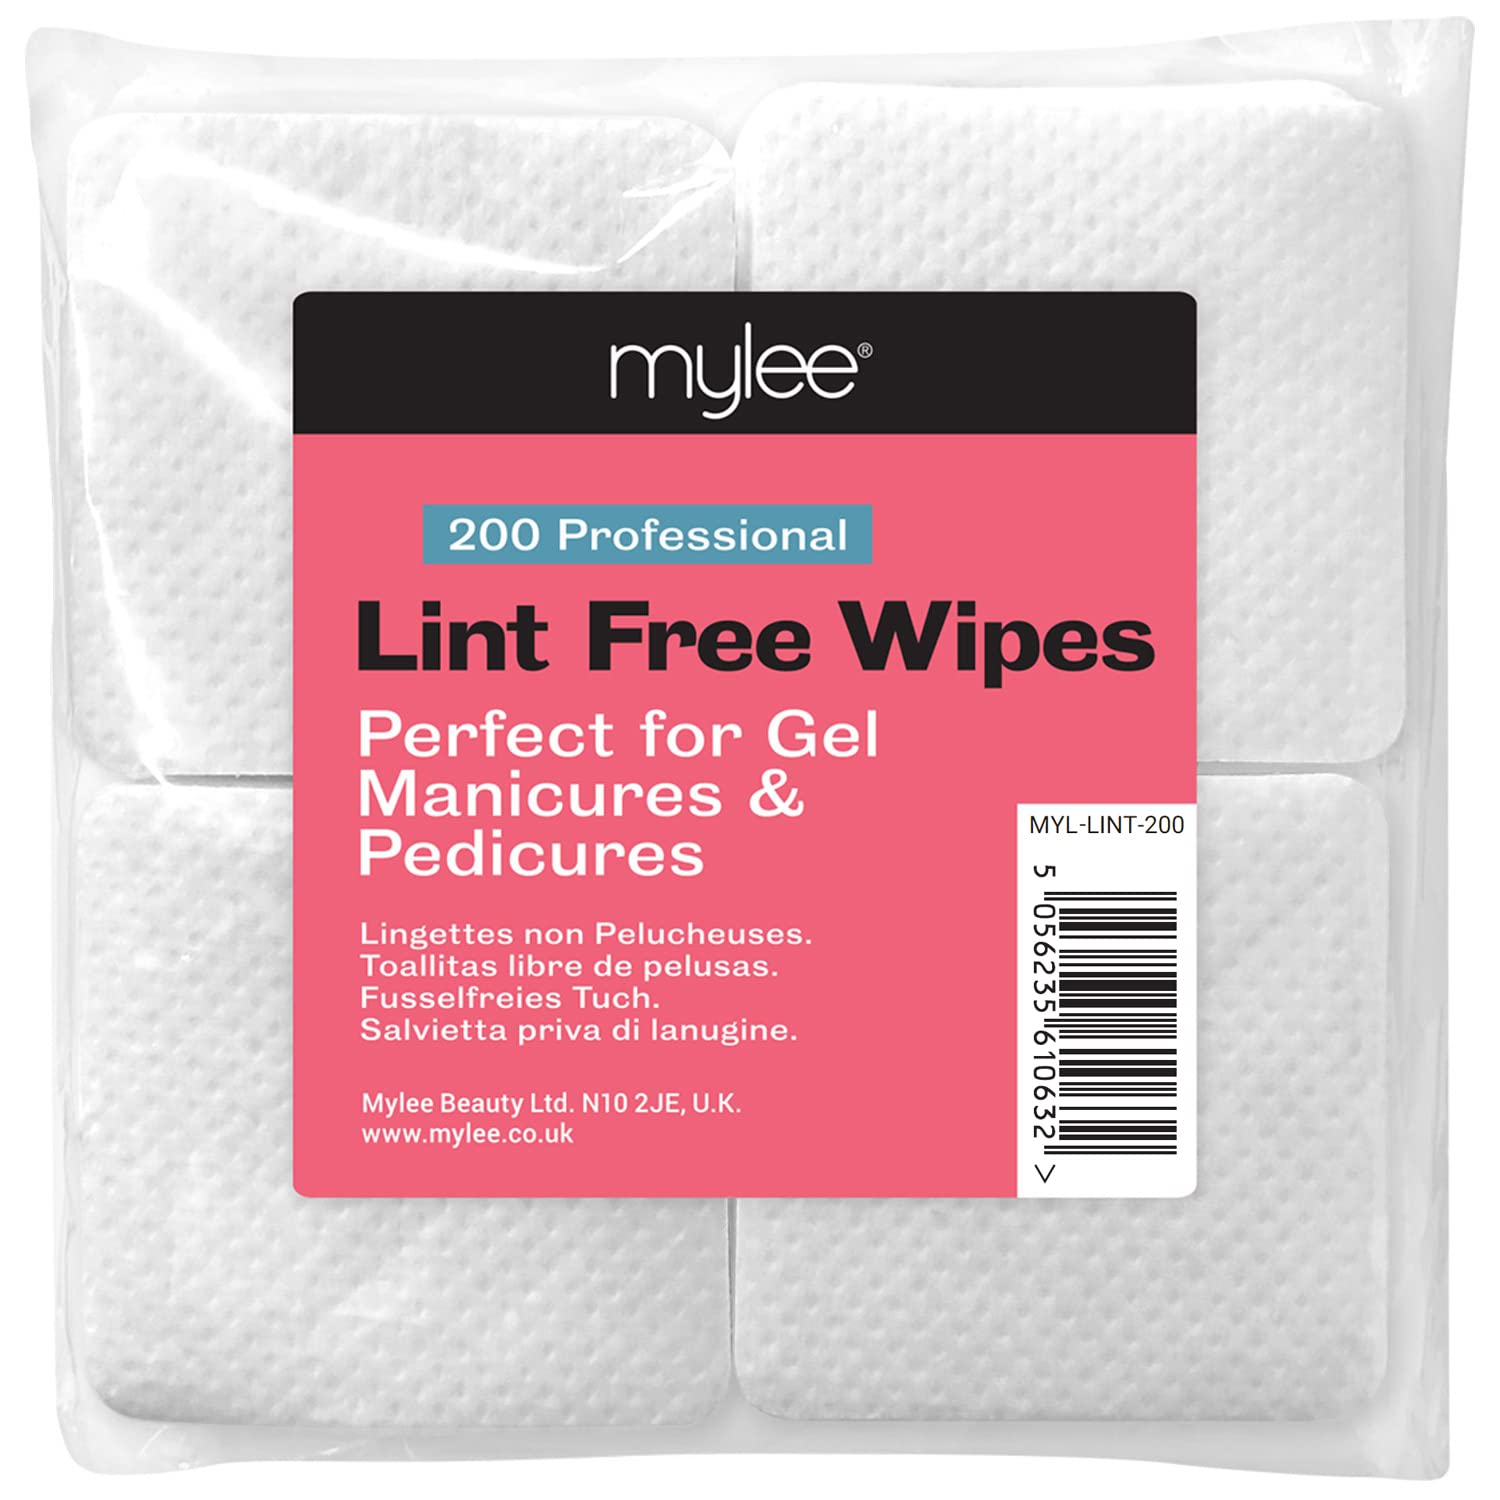 Mylee Lint-Free Nail Wipes 200pcs - Gel Removal Soft Pads for Manicure and Pedicure, Absorbent Remover Wipes, Prep, Clean & Finish Gel Nail Polish, Salon Essential for Professional & Home Use